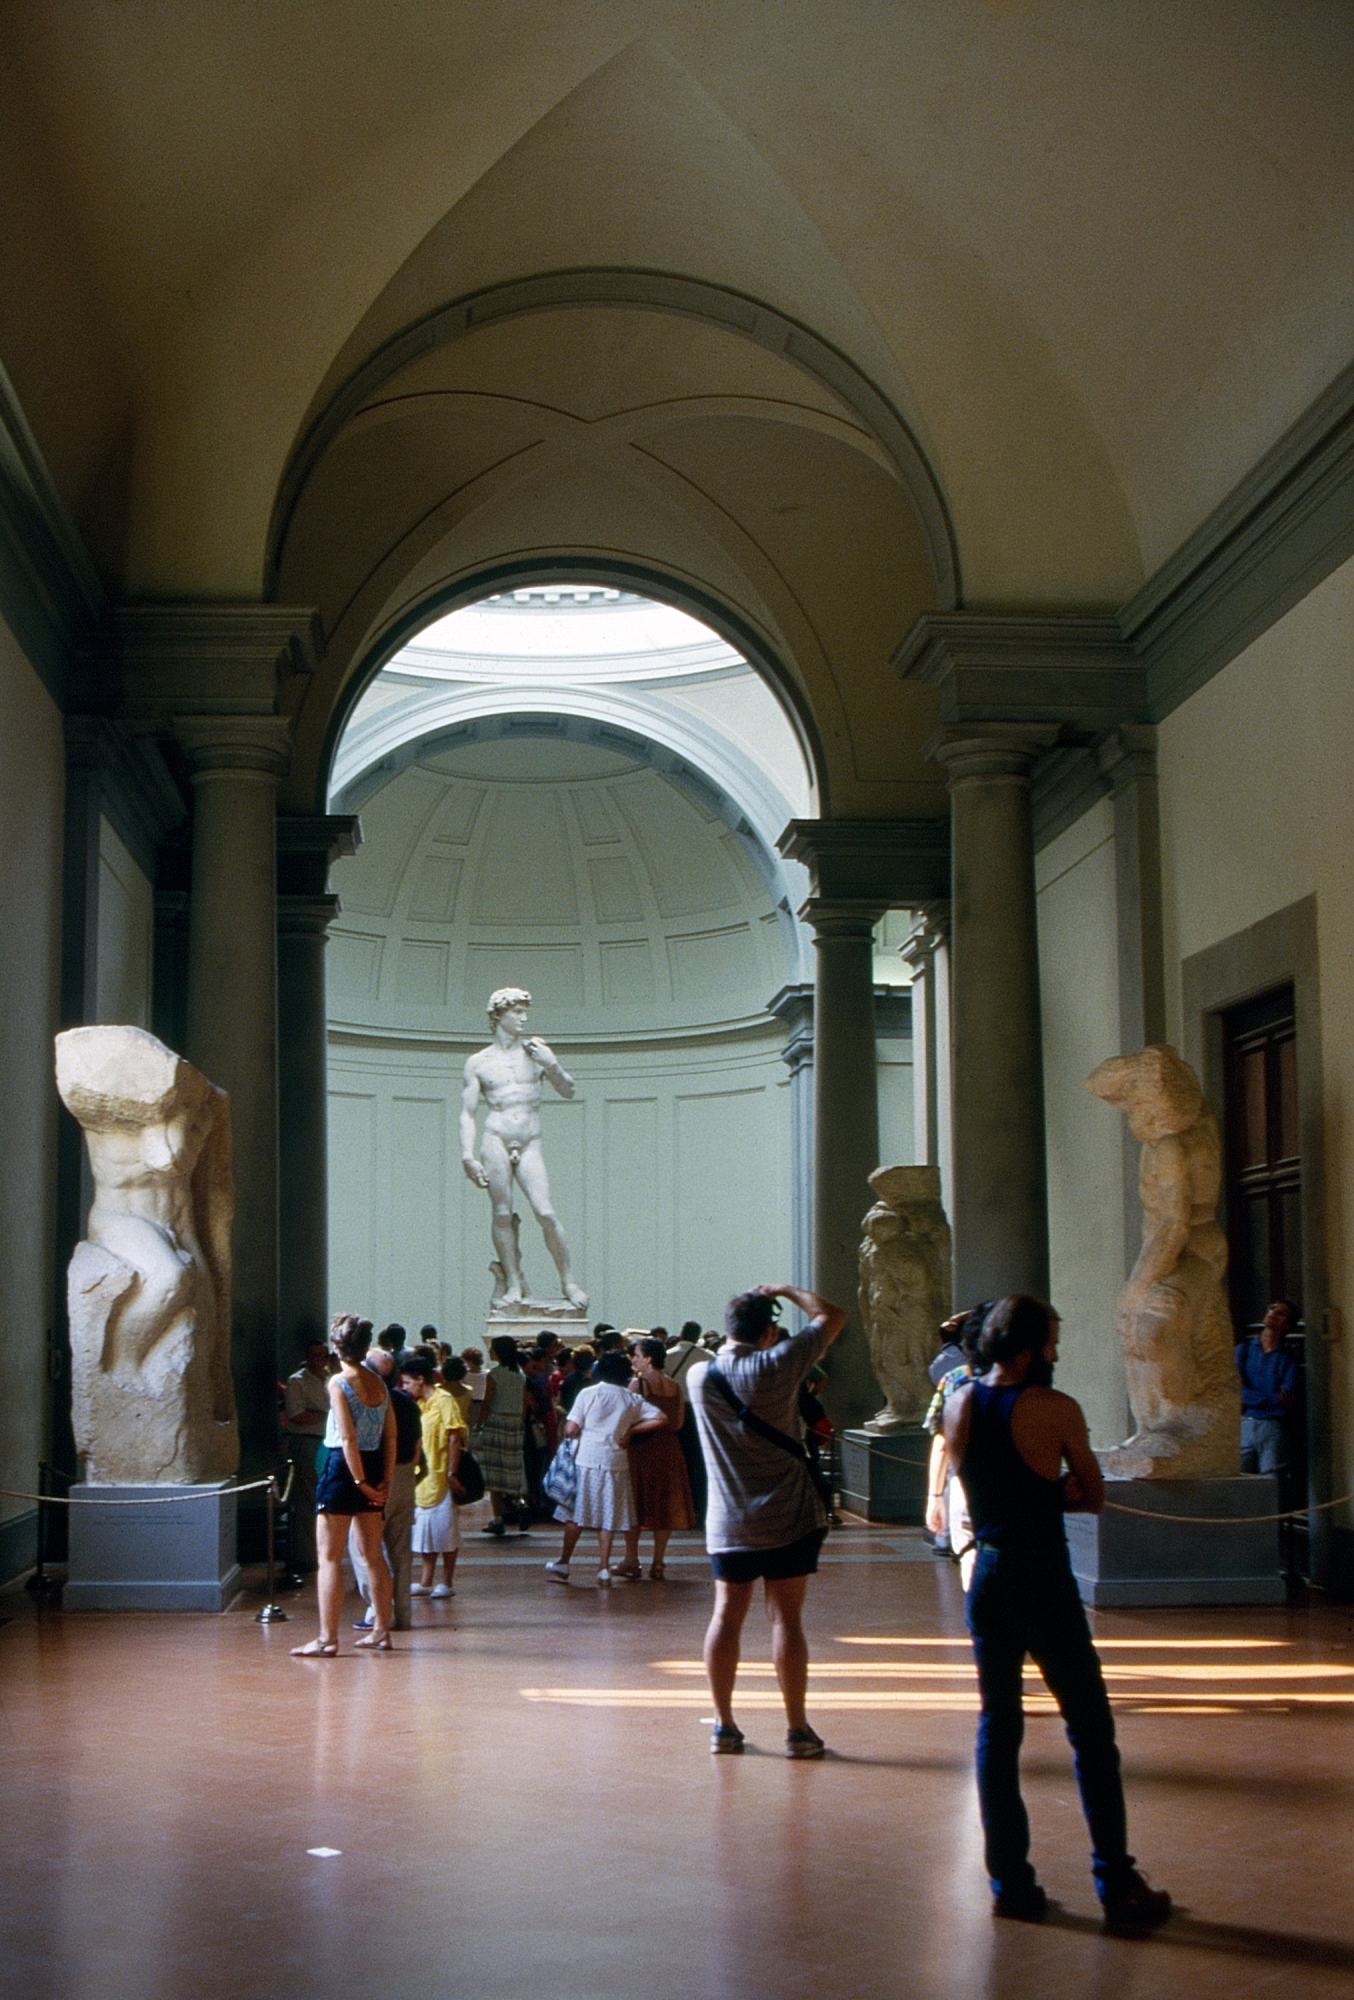 FLORENCE, ITALY - AUGUST 18 : Michelangelo's David statue as it resides inside the Galleria Dell' Academia, August 18, 1986 in Florence, Italy. (Photo by Getty Images/Bob Riha, Jr.)